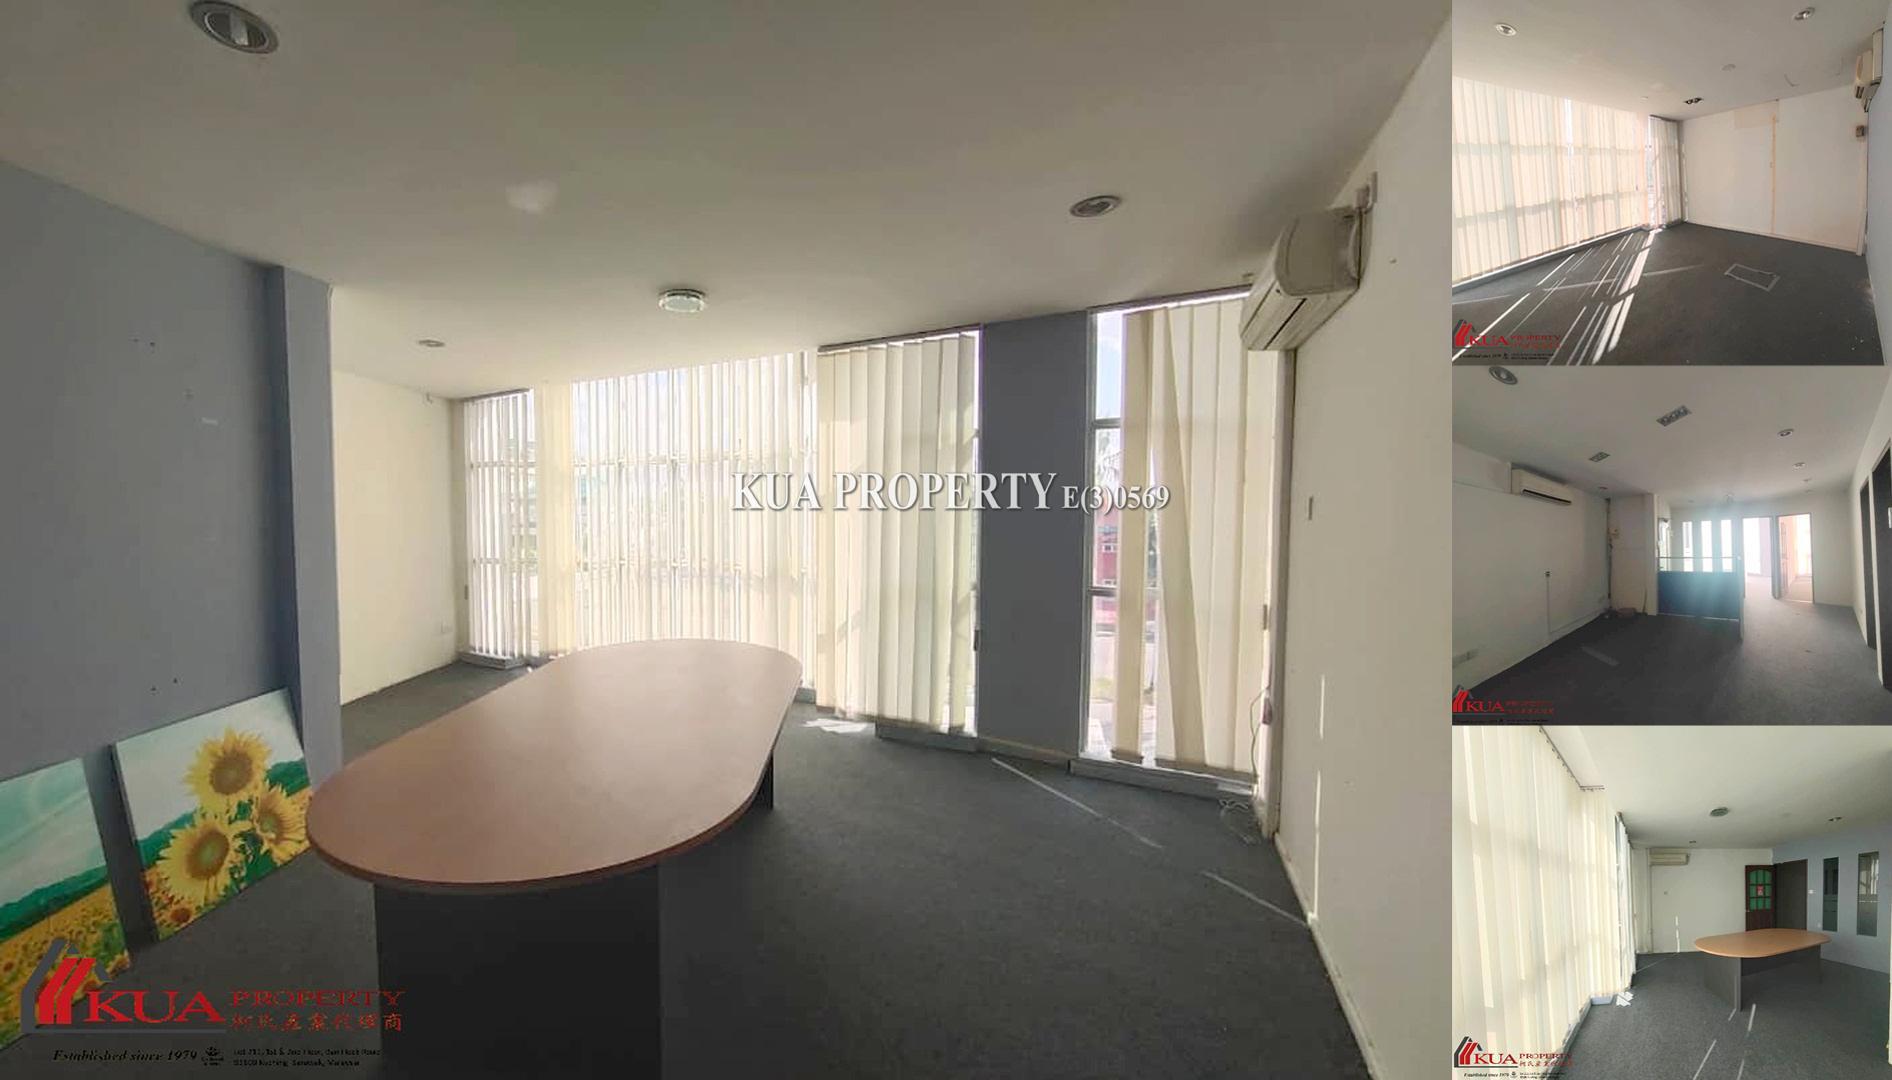 Second Floor Office/Shoplot For Rent! at Fortune Land, Rock Road